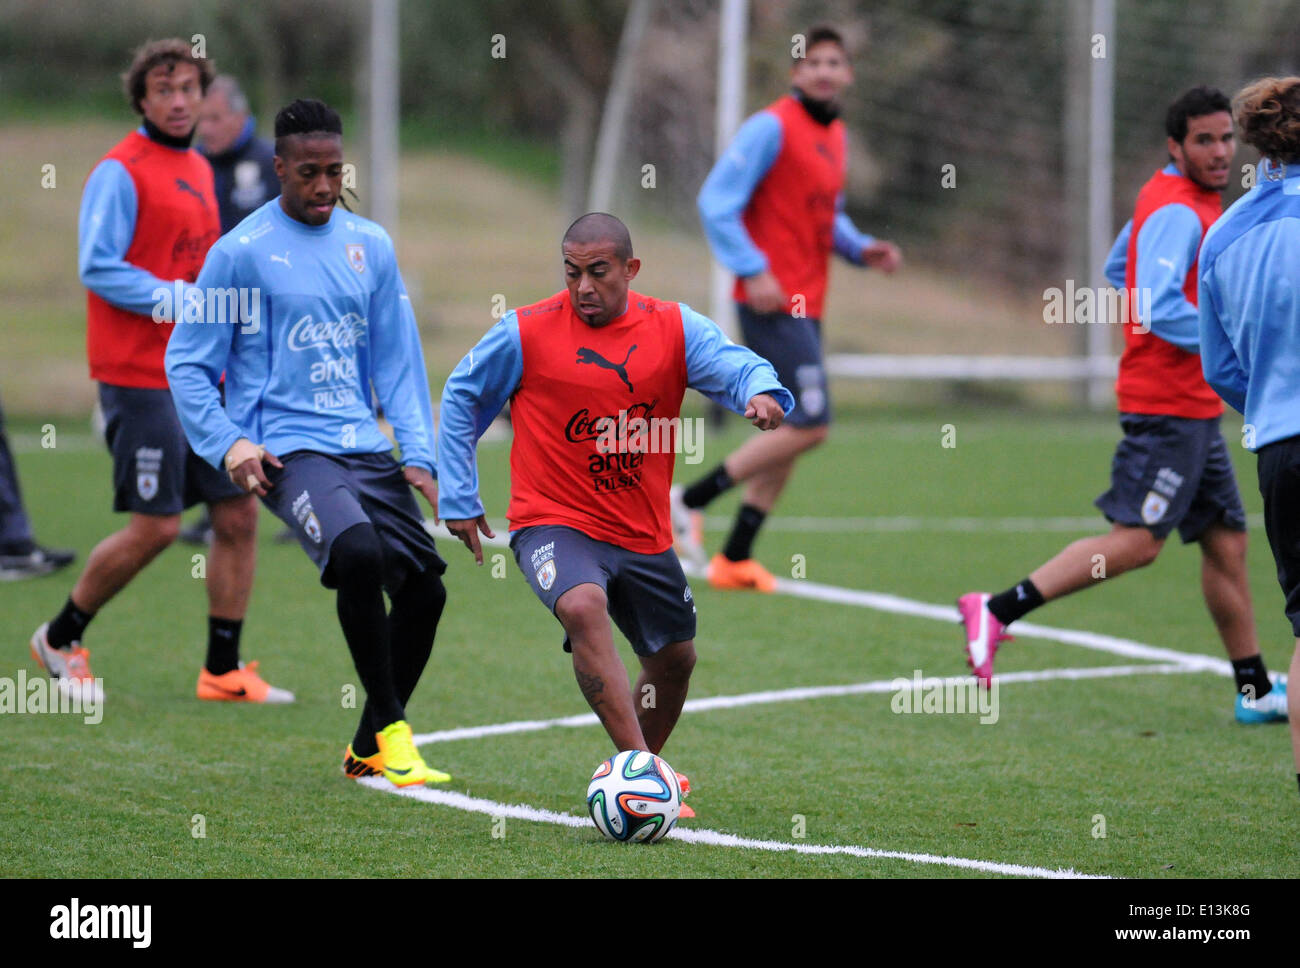 Montevideo, Uruguay. 21st May, 2014. Uruguay's national team players take part during a training session before the FIFA World Cup, at Uruguay Celeste complex, in Montevideo, capital of Uruguay, on May 21, 2014. © Nicolas Celaya/Xinhua/Alamy Live News Stock Photo